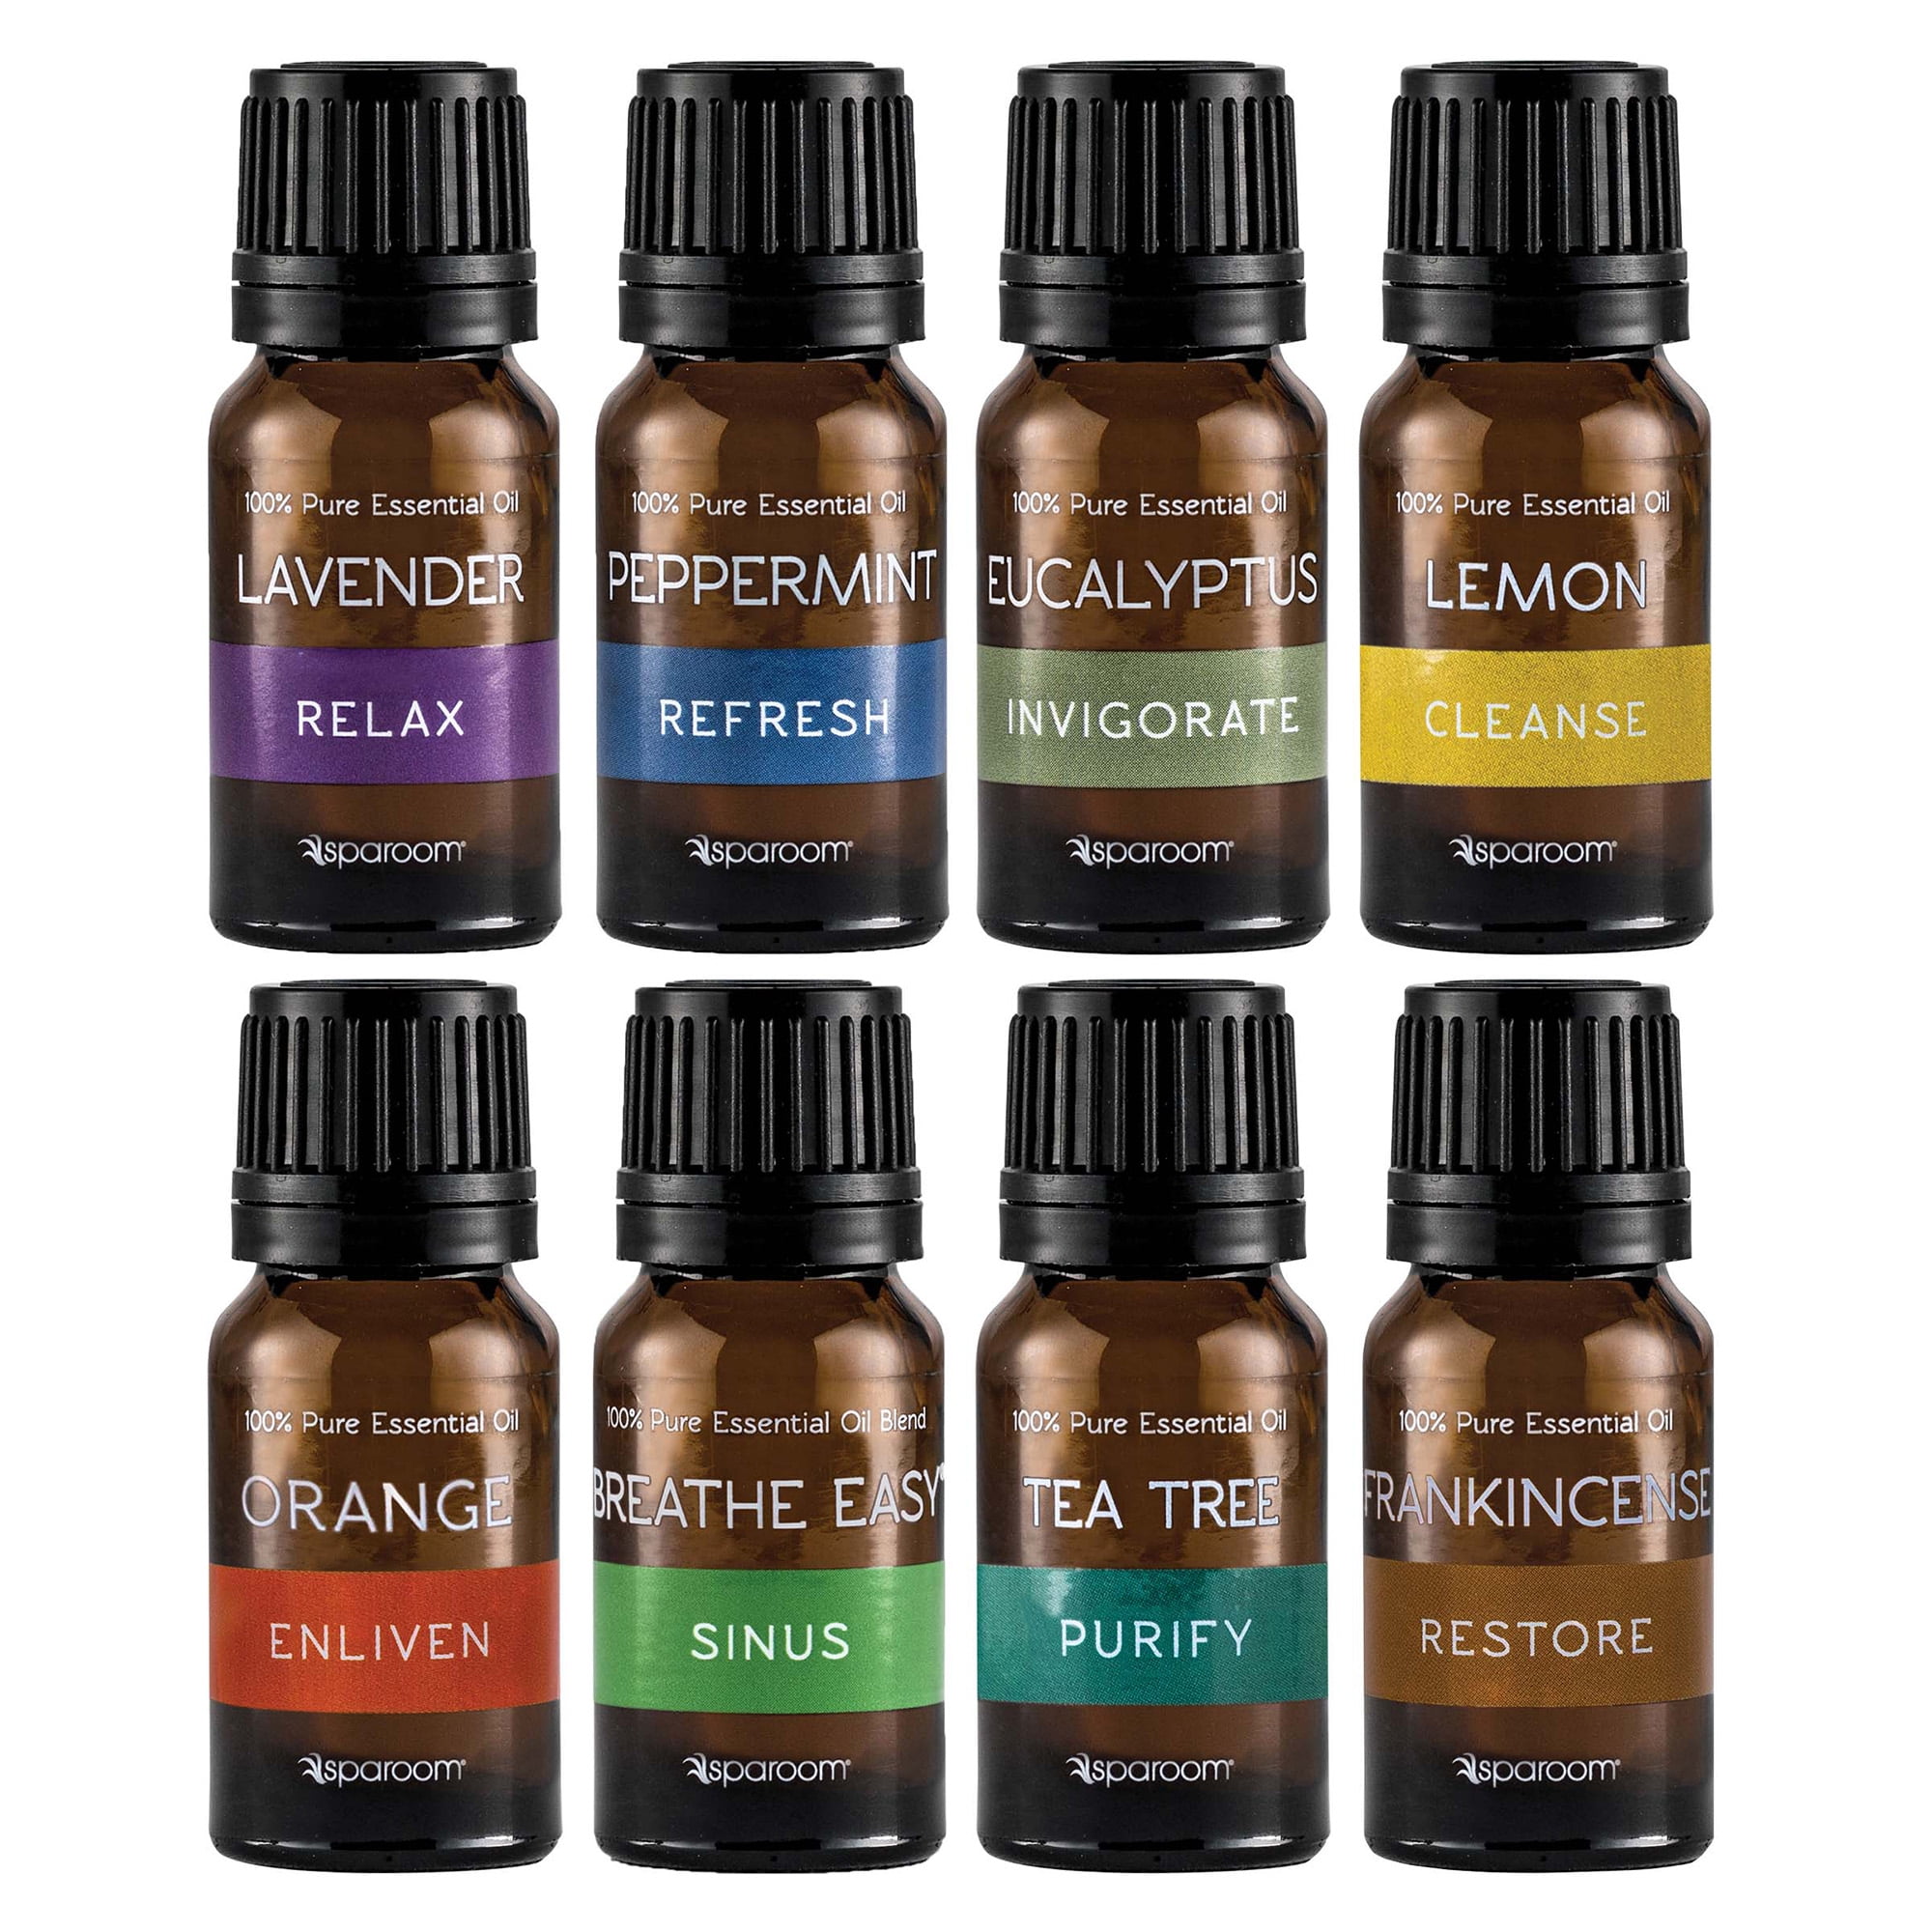 Young Living Essential Oil Samples - 5 Pack from InvisiPure